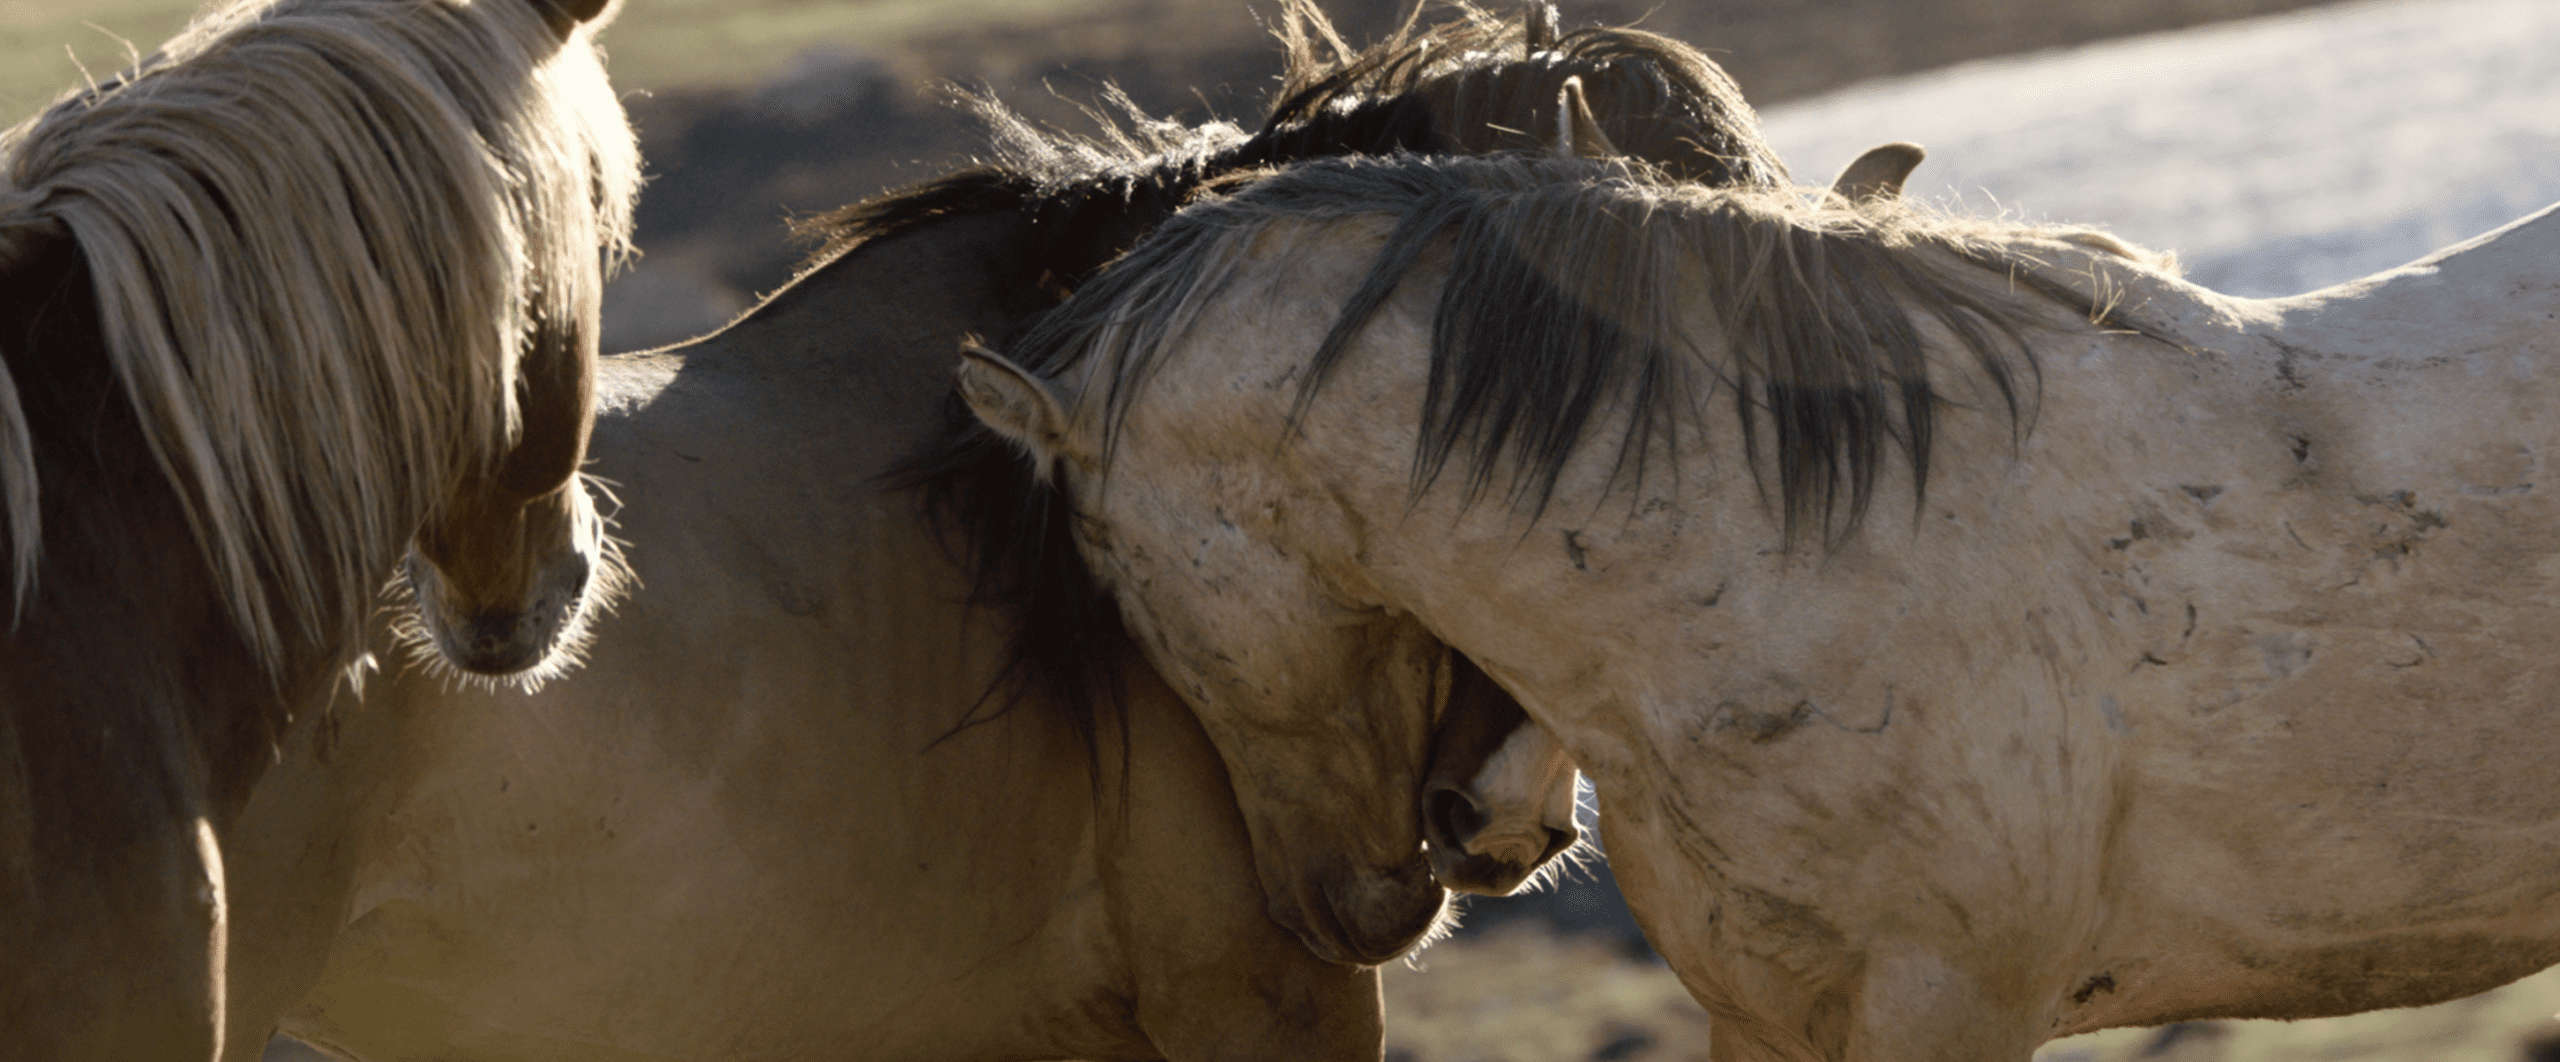 A Wild Horse Embrace from Wild Beauty